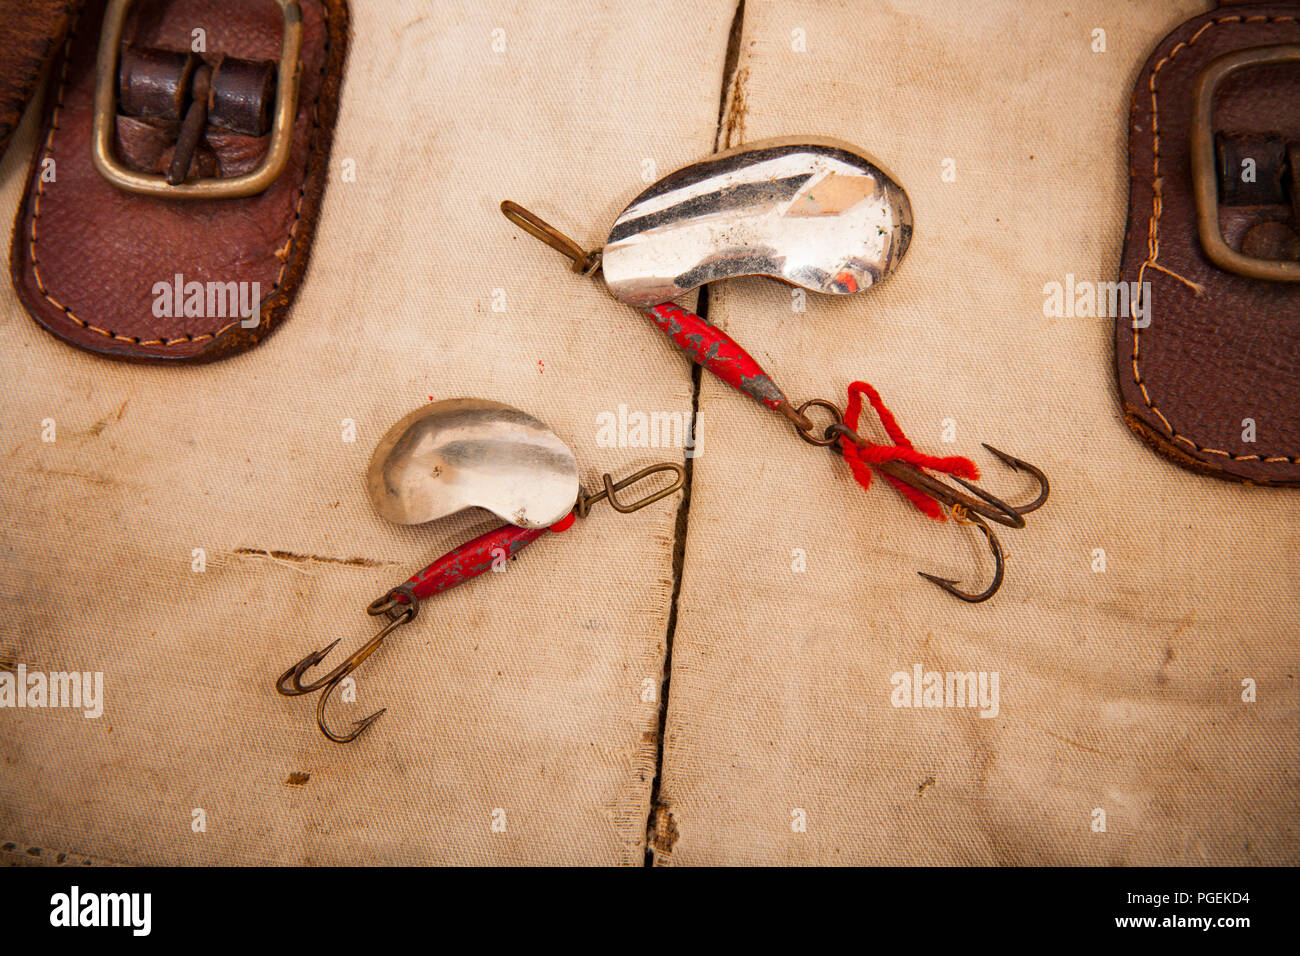 https://c8.alamy.com/comp/PGEKD4/two-metal-lures-known-as-kidney-spoons-due-to-their-shape-with-treble-hooks-displayed-on-an-old-fishing-tackle-bag-from-a-collection-of-vintage-fishi-PGEKD4.jpg